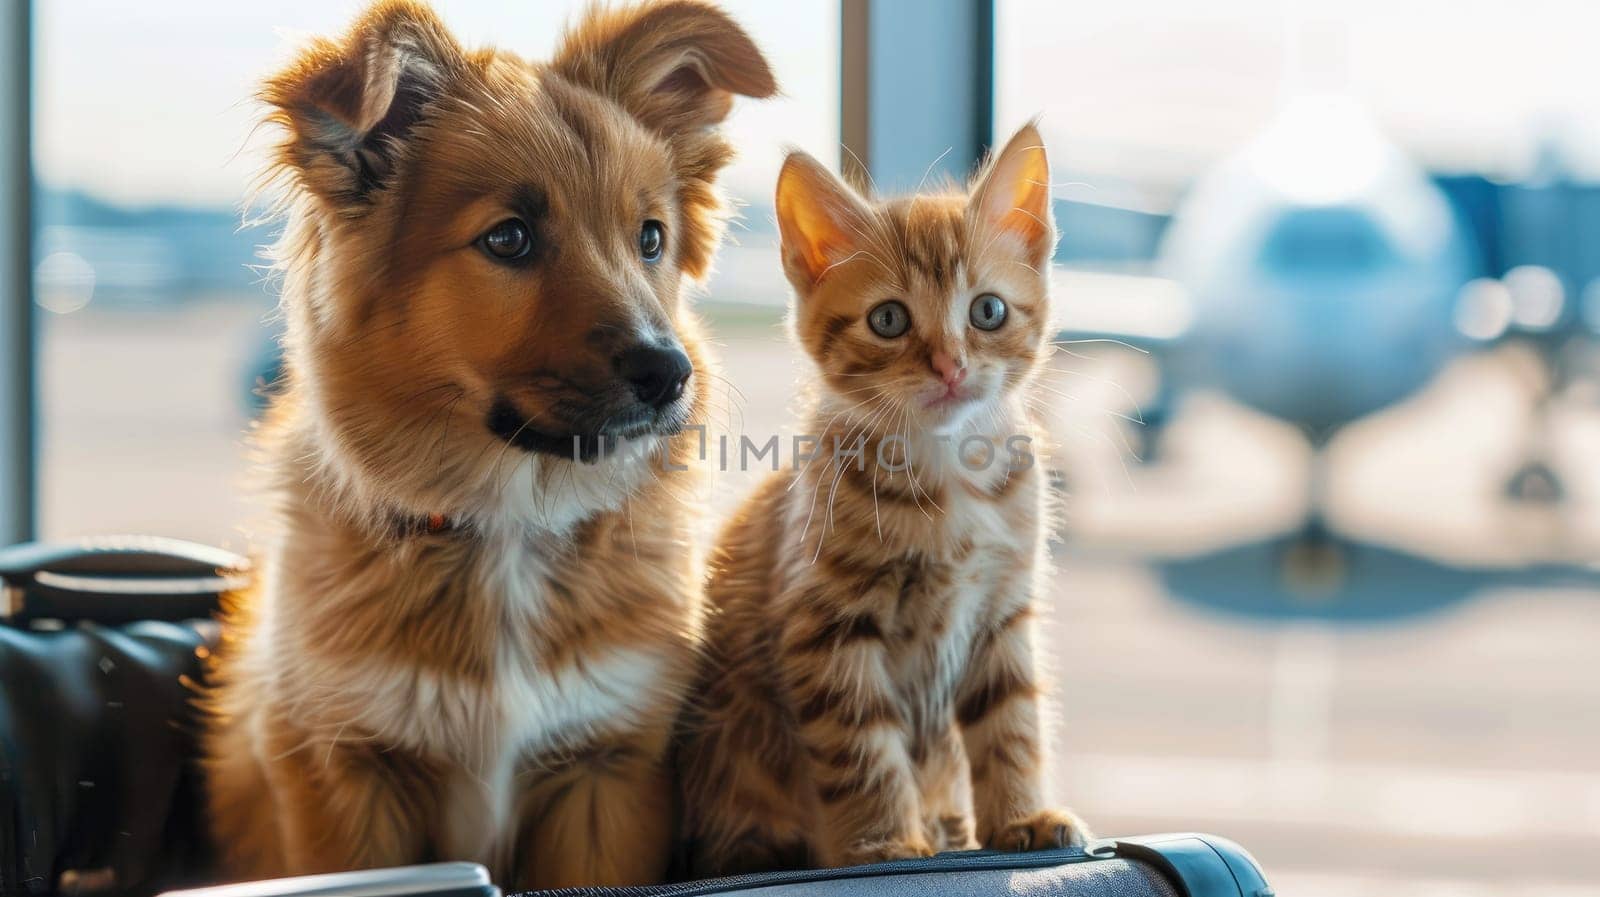 A dog and a cat are sitting on a bench in an airport waiting for their flight by nijieimu